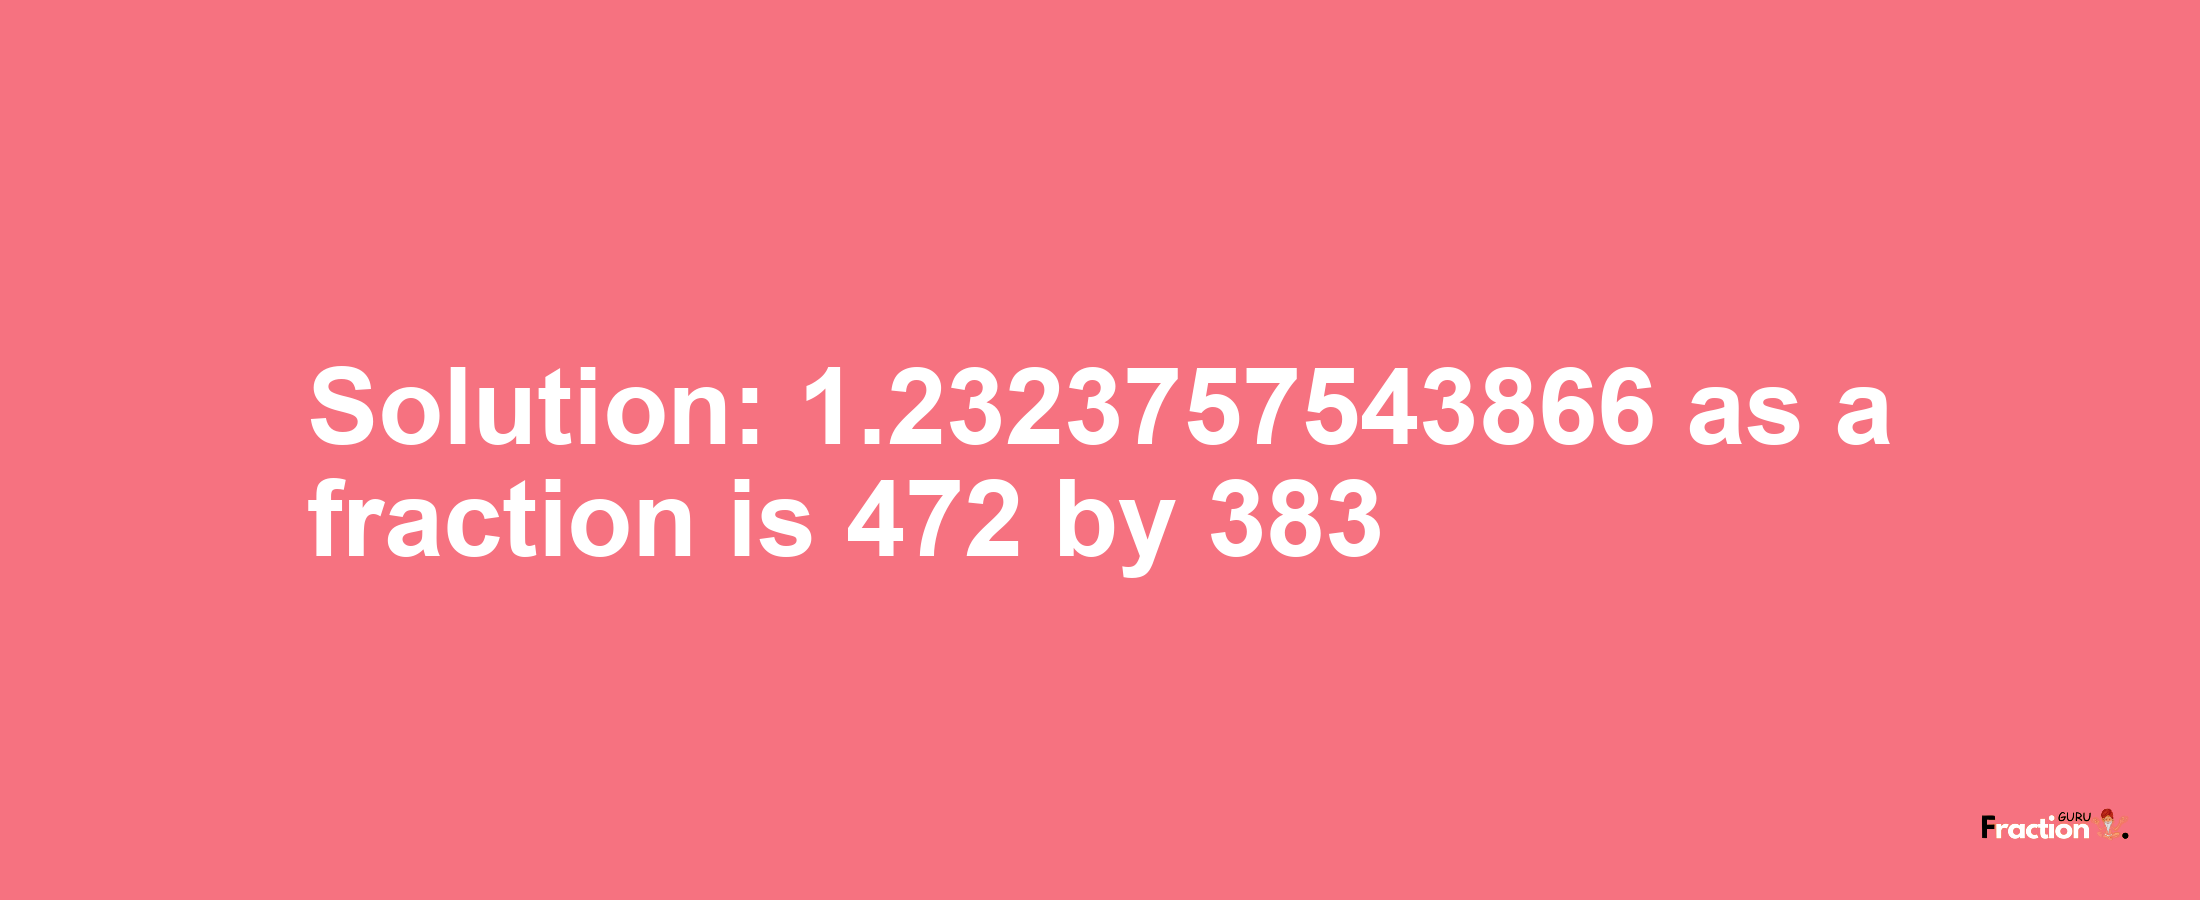 Solution:1.2323757543866 as a fraction is 472/383